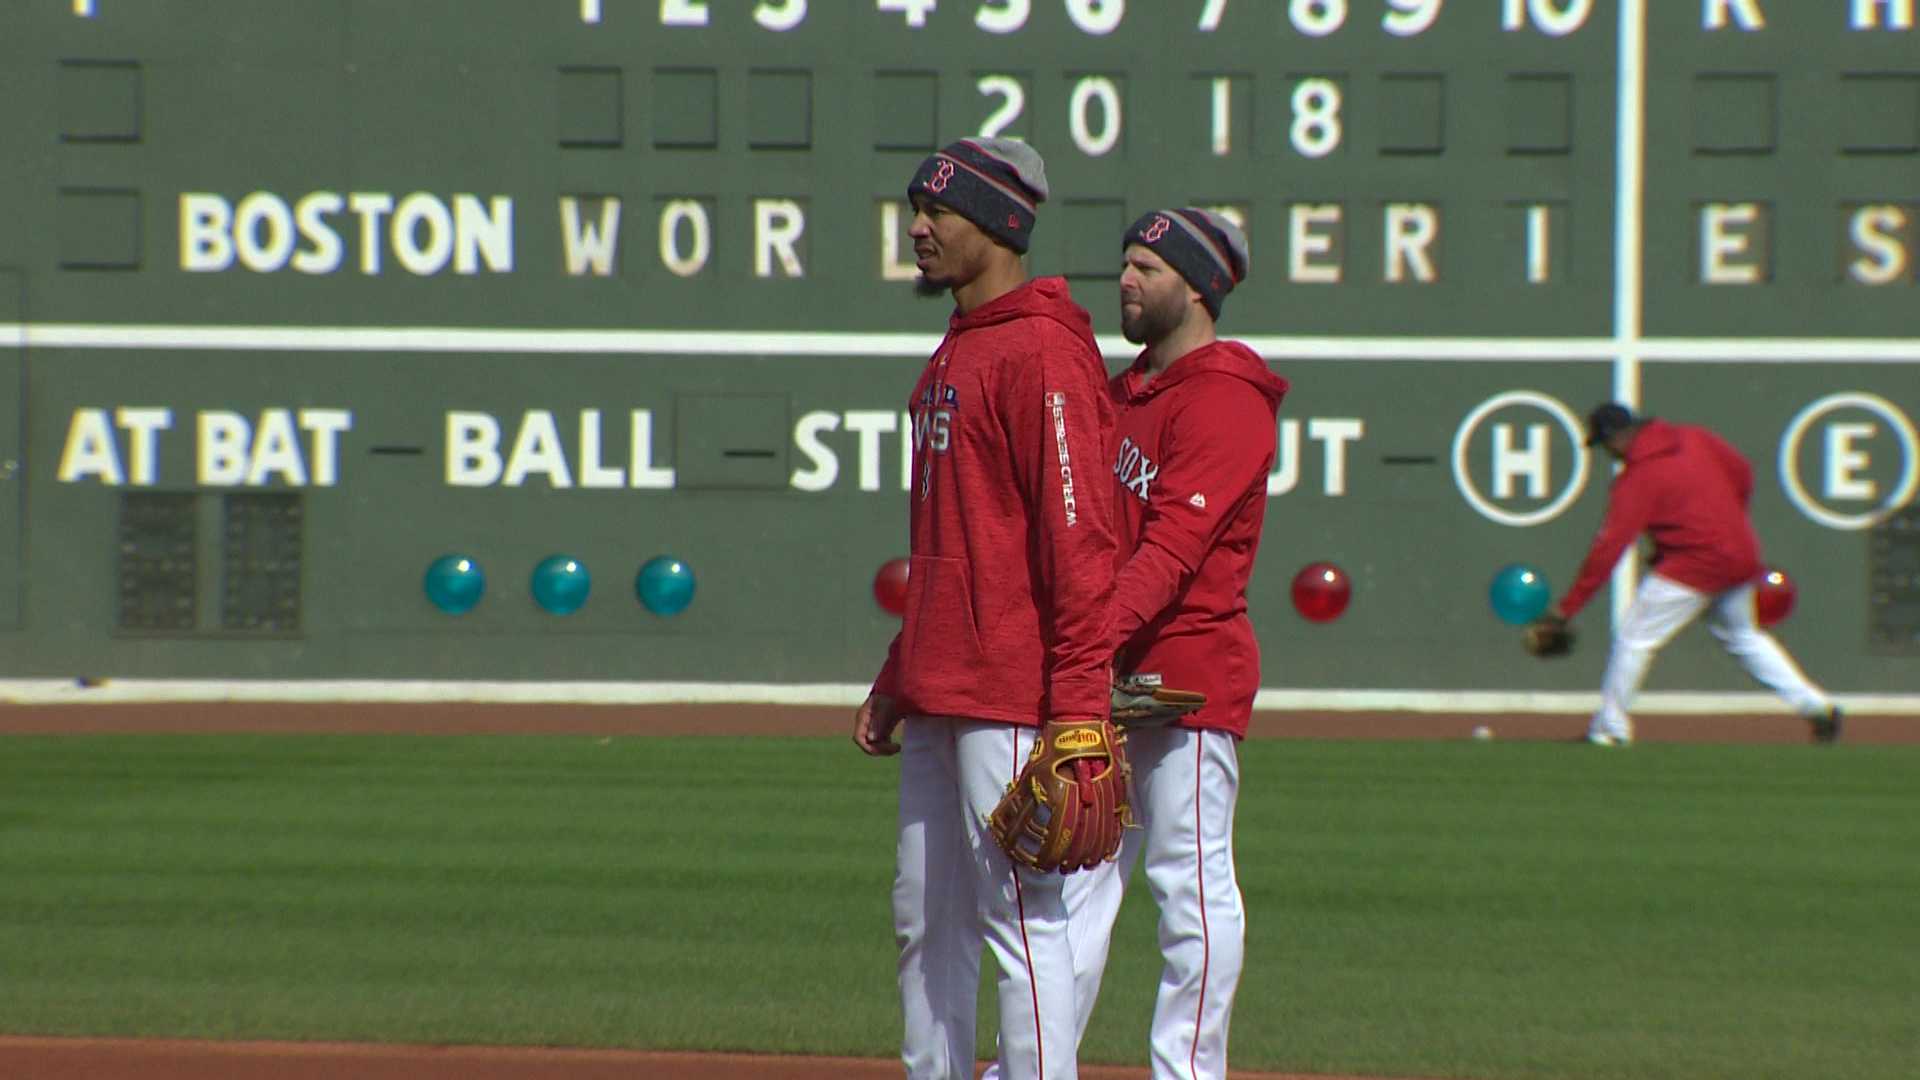 Cora: There's a chance Betts plays 2B for Red Sox during World Series